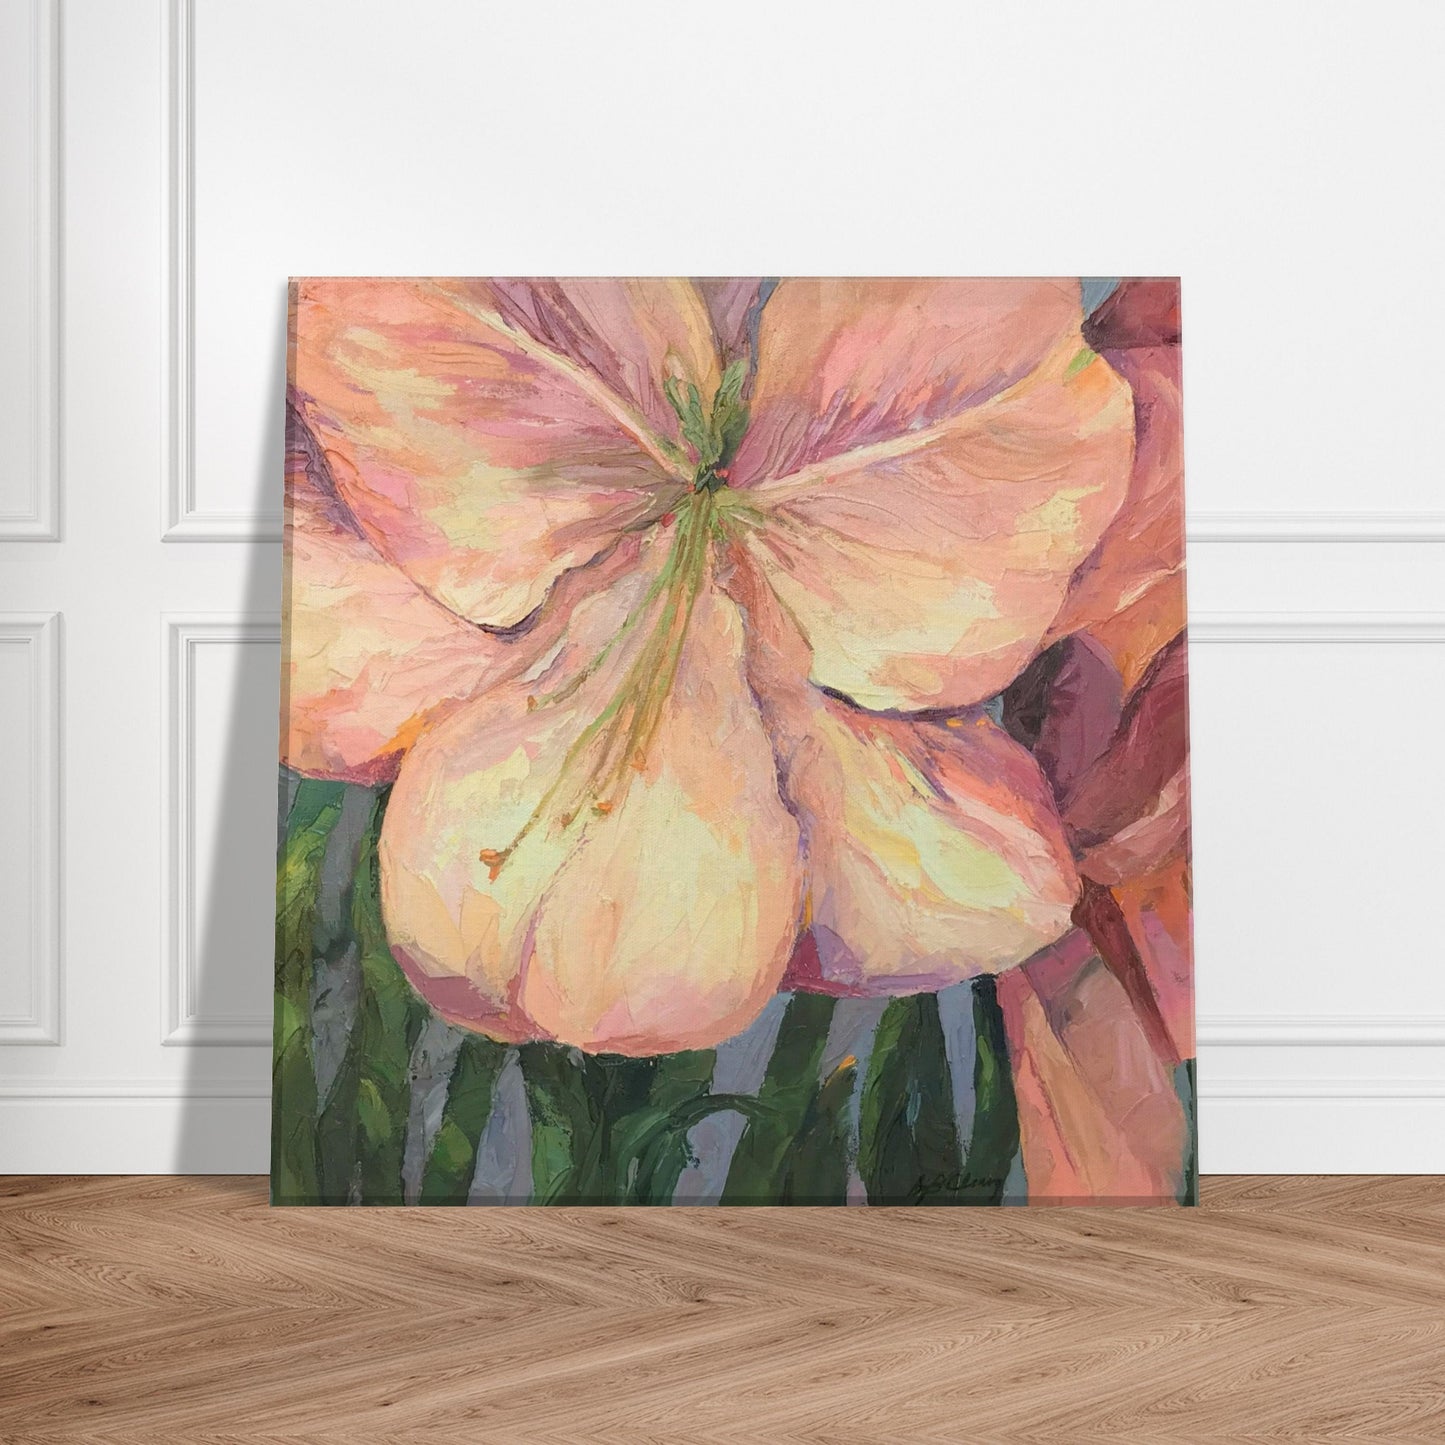 "Amaryllis" Floral Print 12x12 inch on Canvas by Barbara Cleary Designs